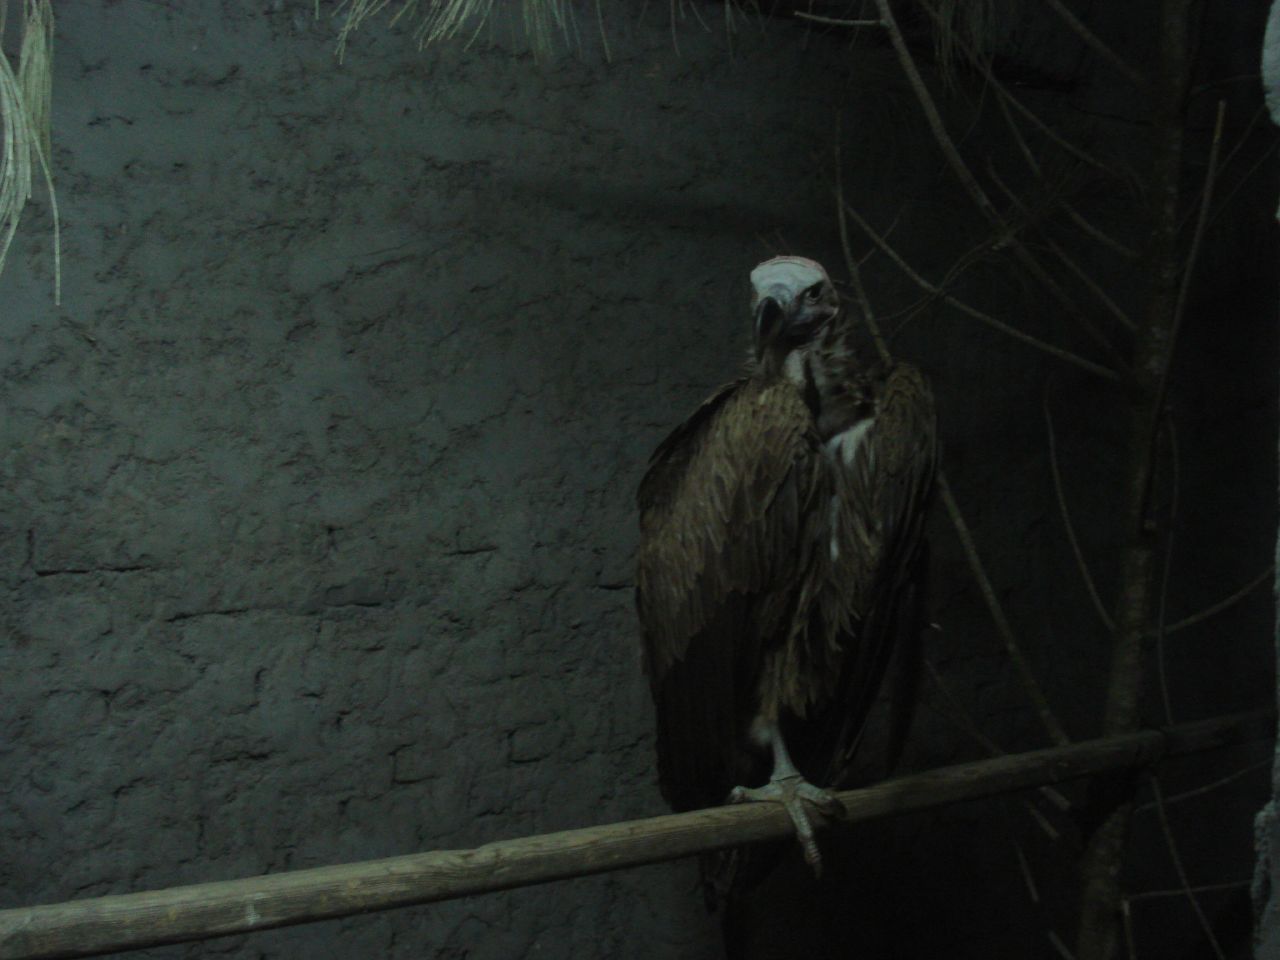 a vulture that is sitting on a wooden pole